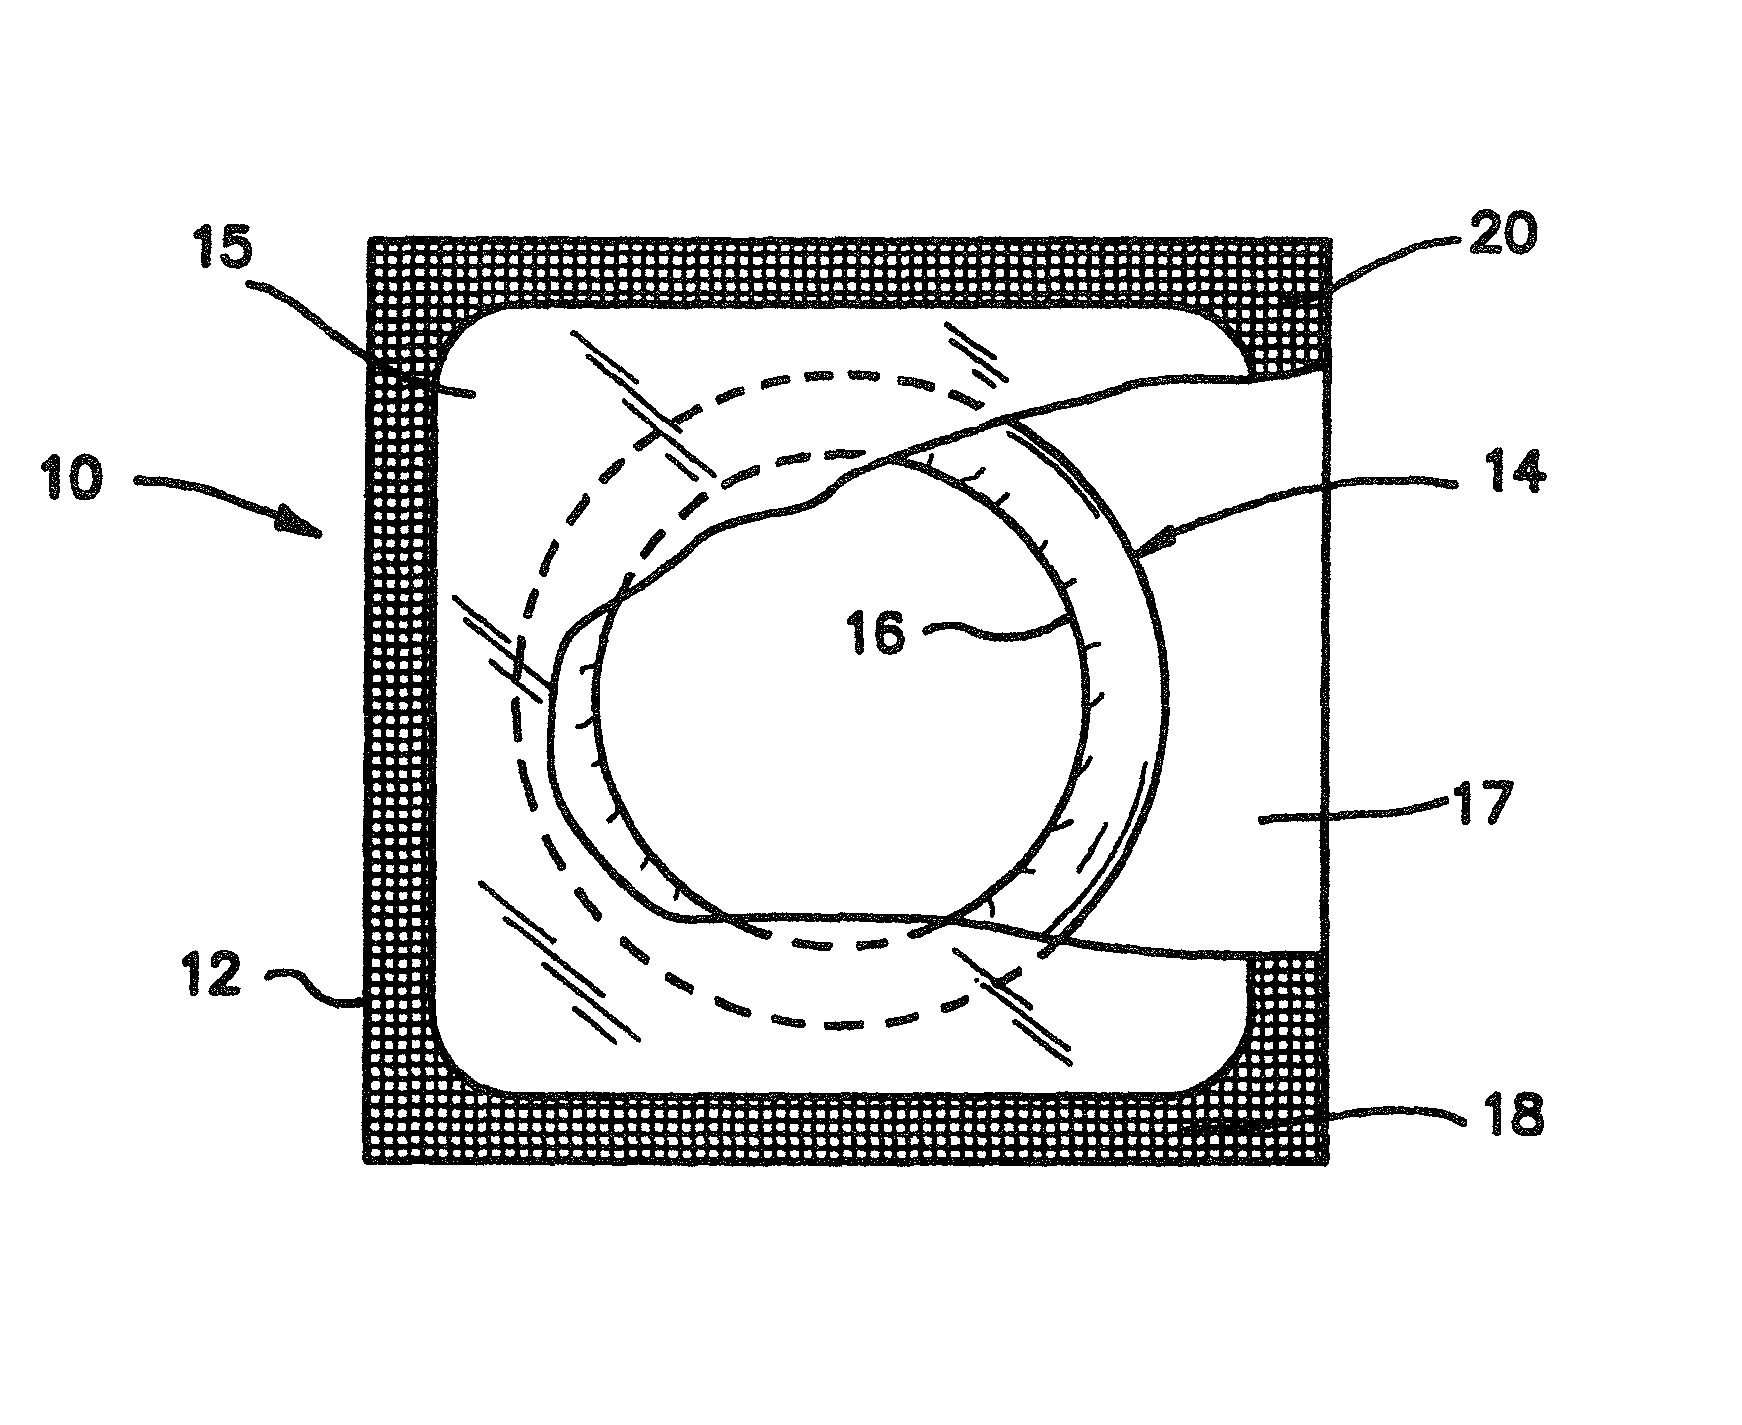 Clear, washable lubricant compositions and methods of making same